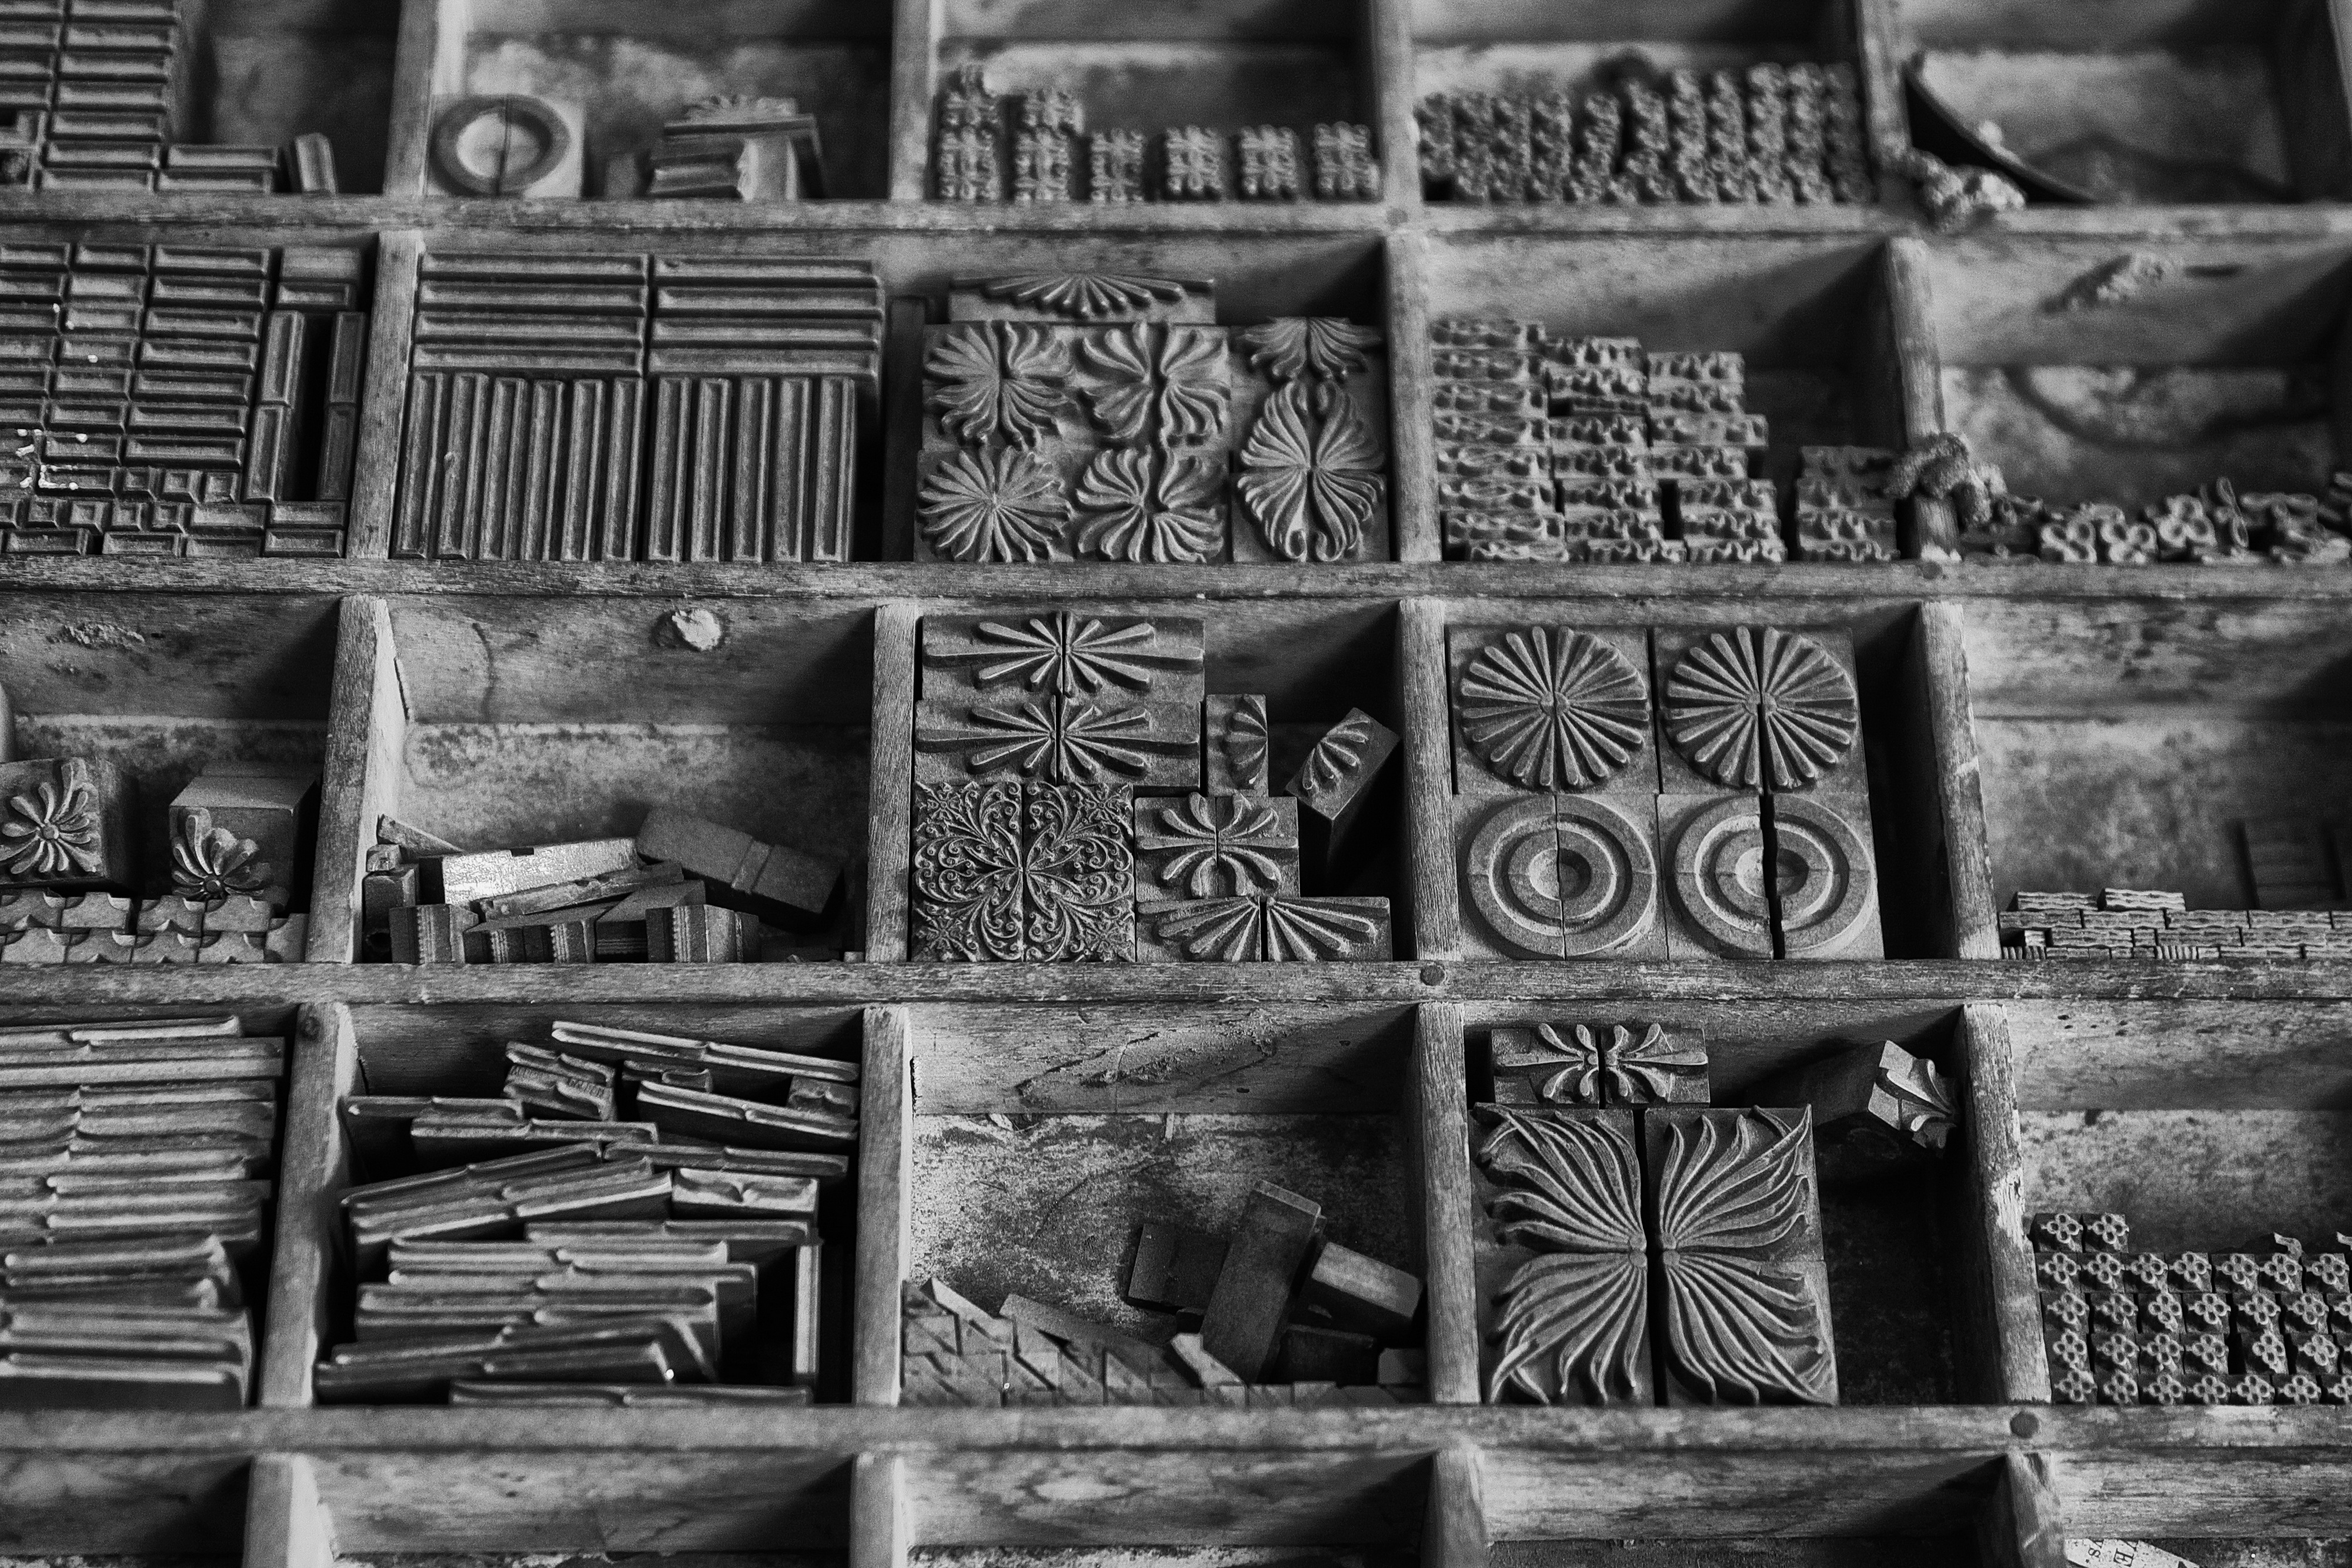 Boxed magic – an Old School printer’s tray packed with lead.